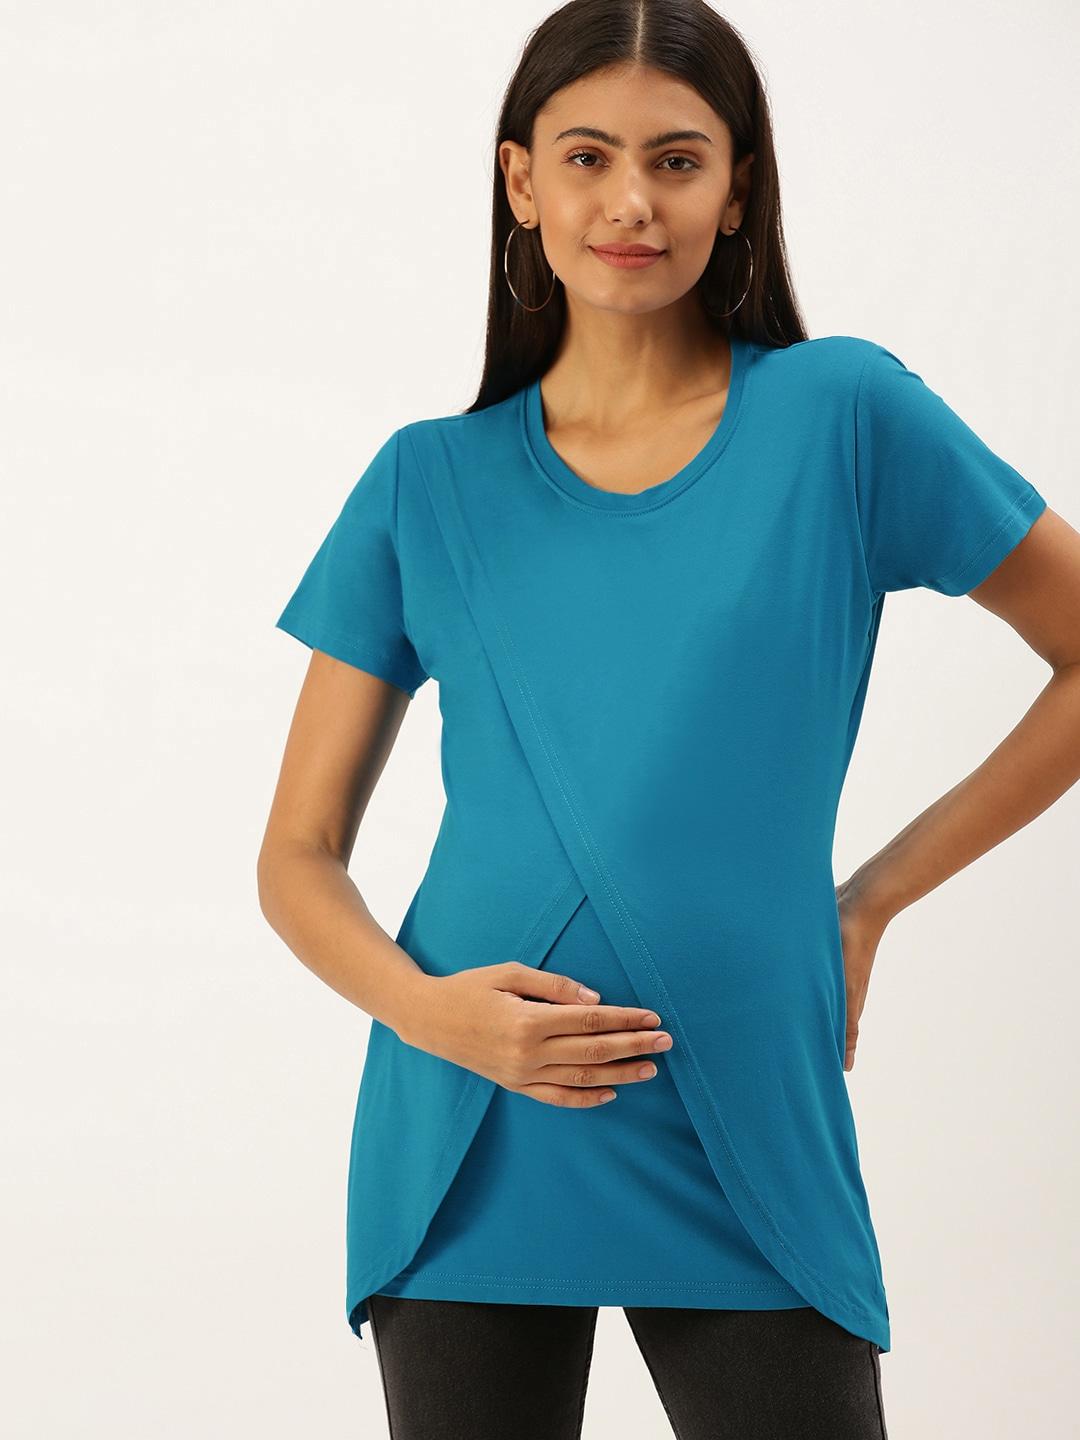 blush 9 maternity women blue solid layered top